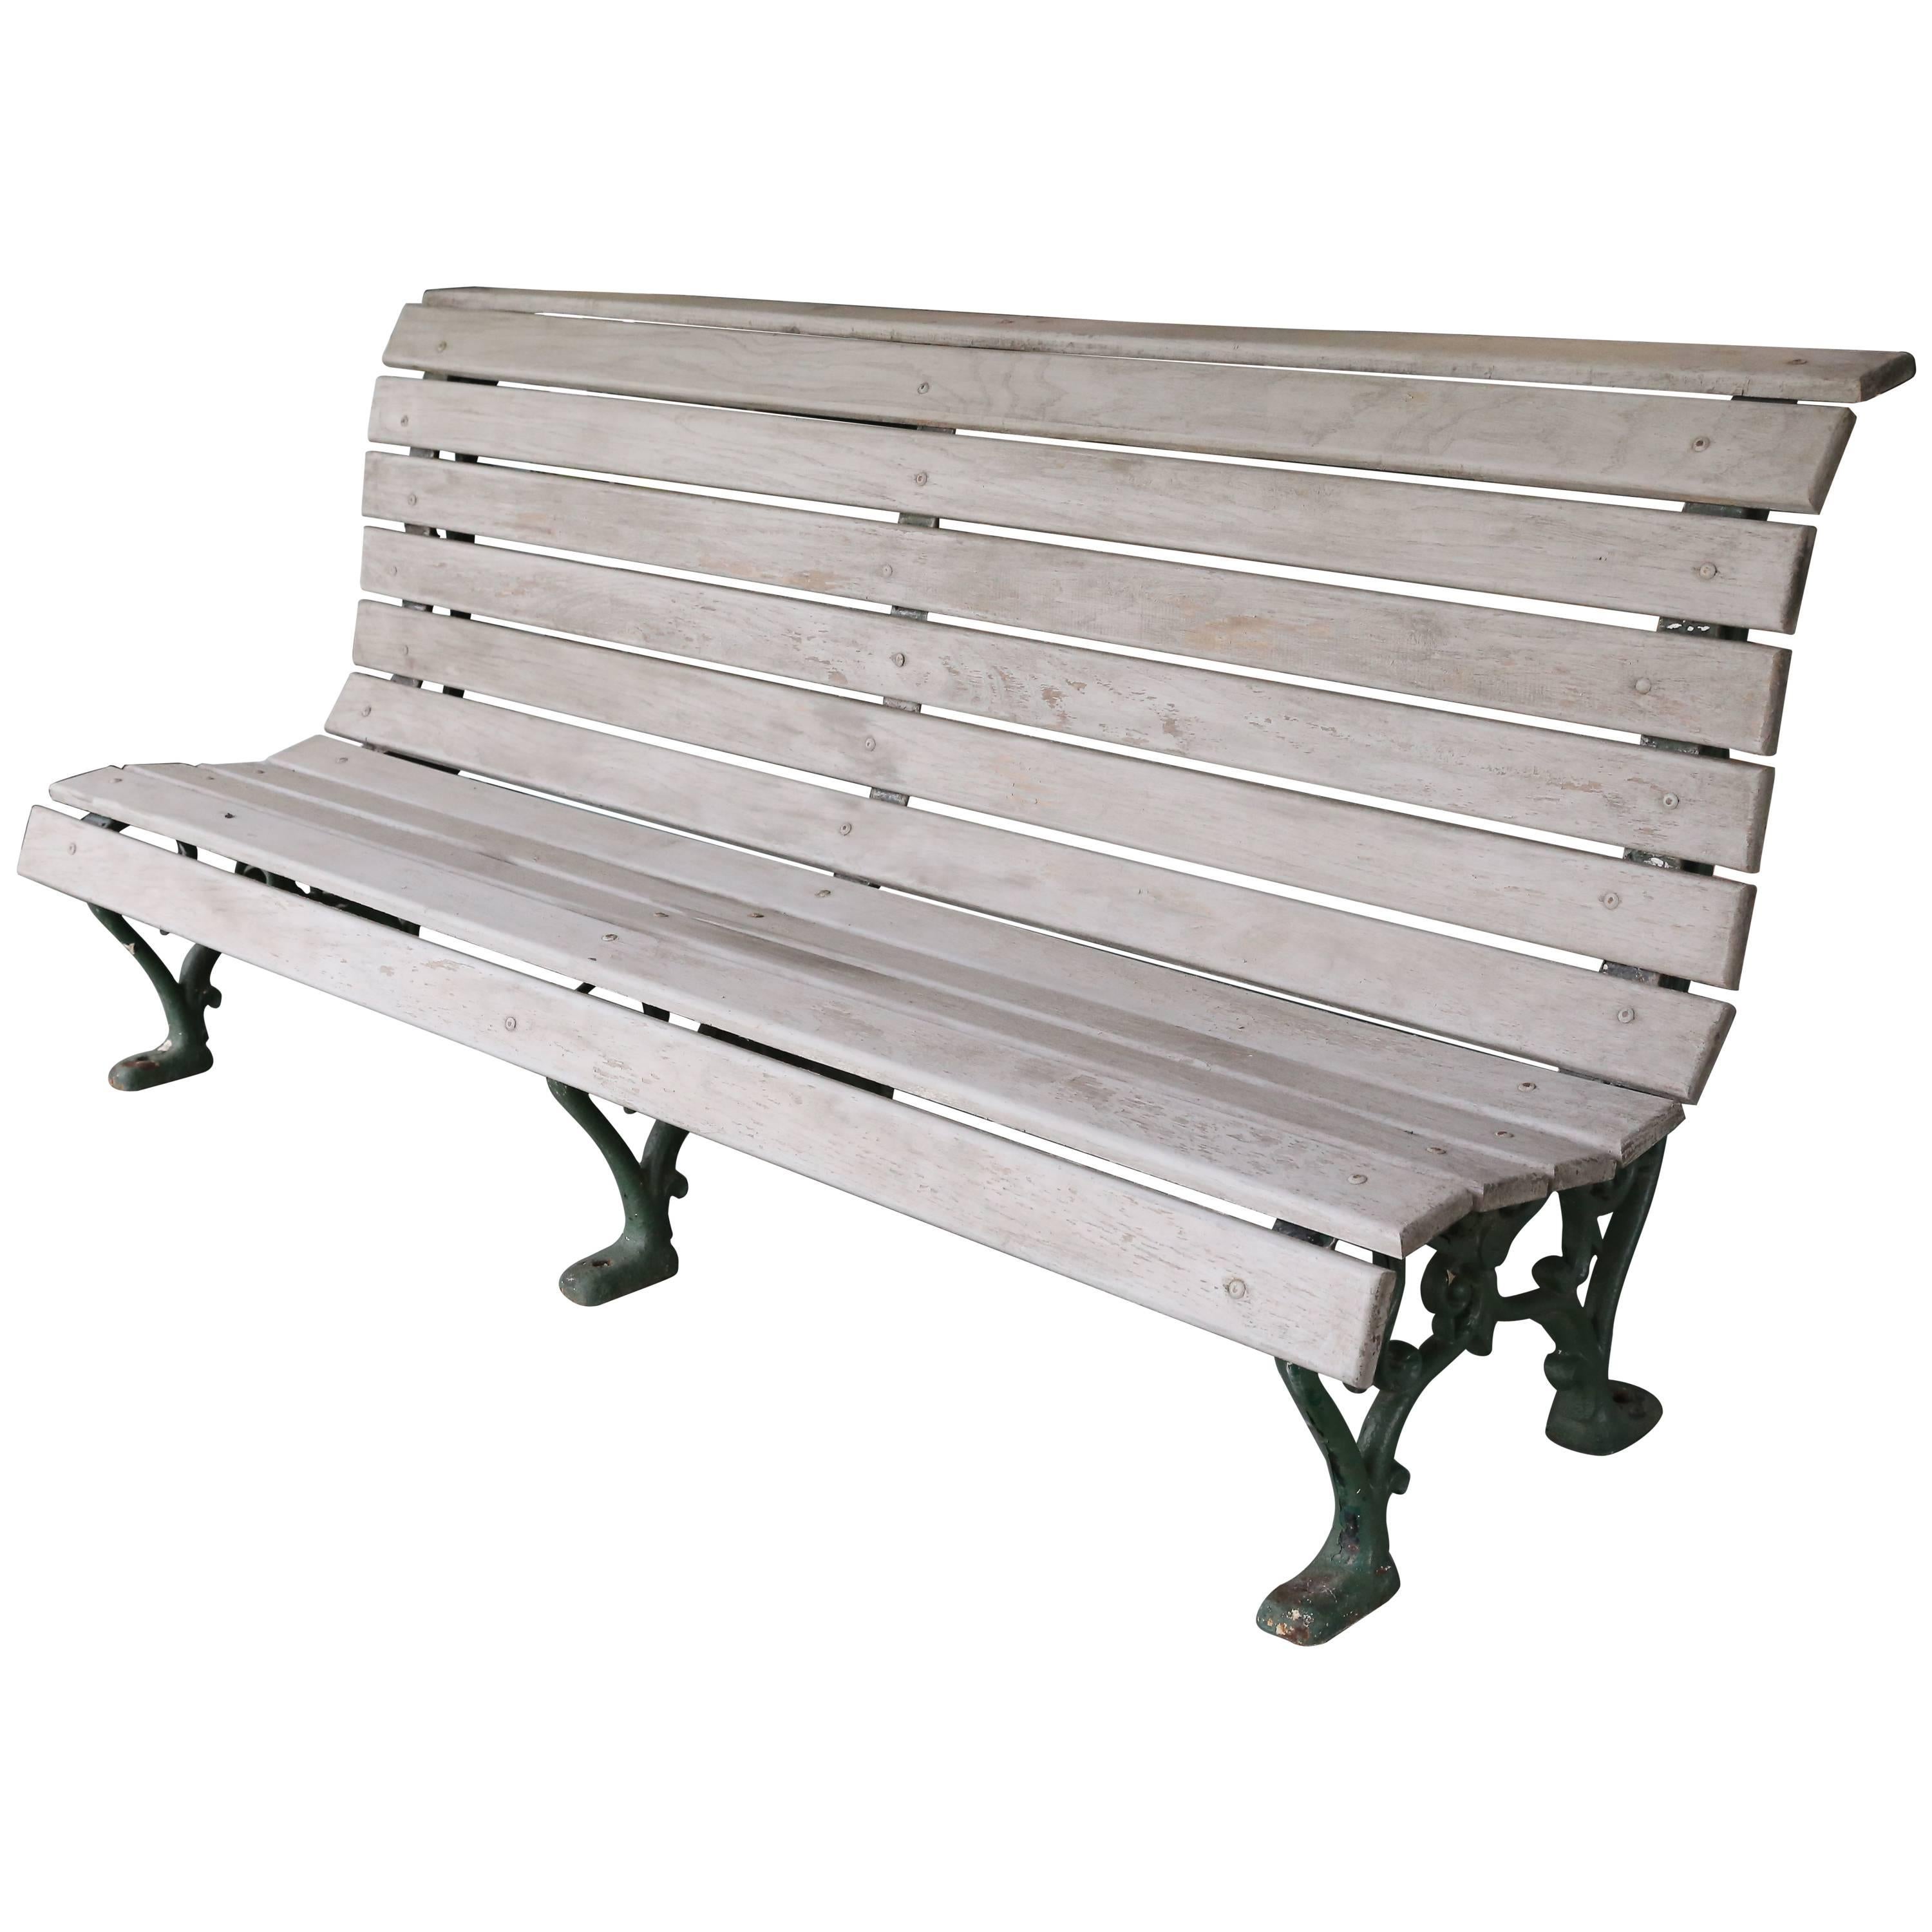 Curved Wood Slat and Iron Park Bench with Back from Belgium, circa 1910